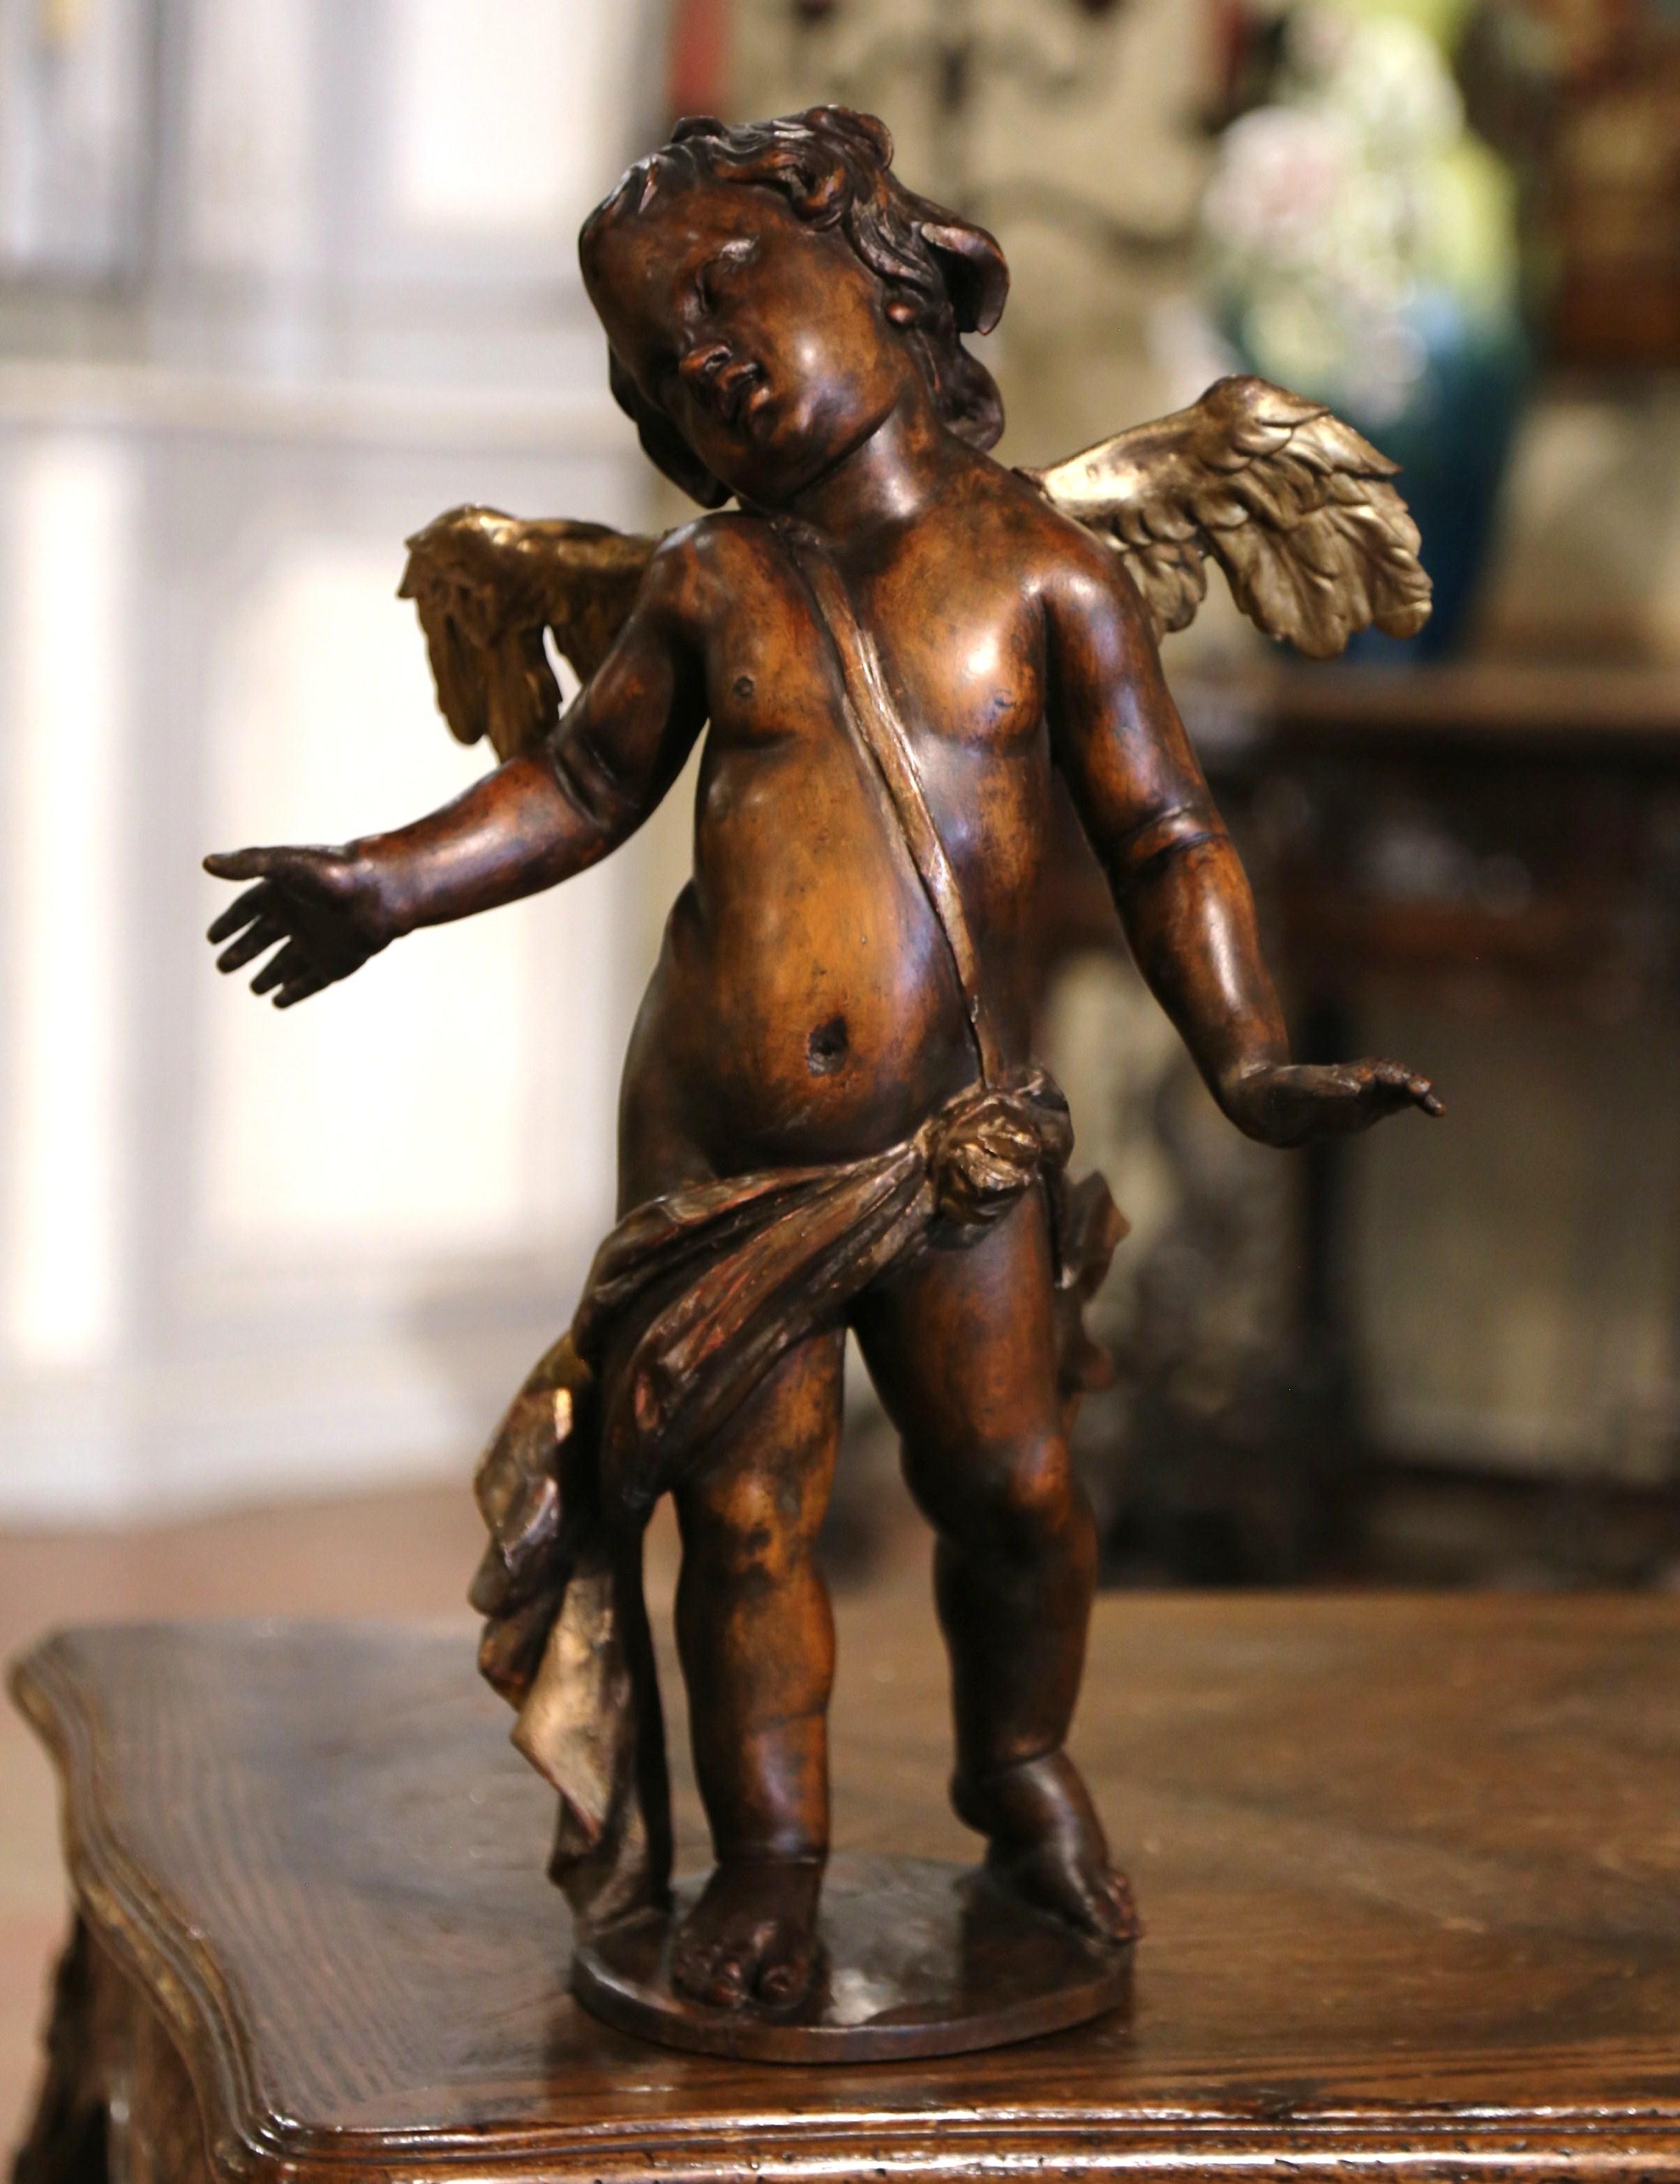 This elegant antique putti figure was carved in Italy, circa 1770. Standing on an oval base, the detailed statue features a young boy with wings his head turned to the side. The adorable cherub is wearing traditional clothing wrapped around his